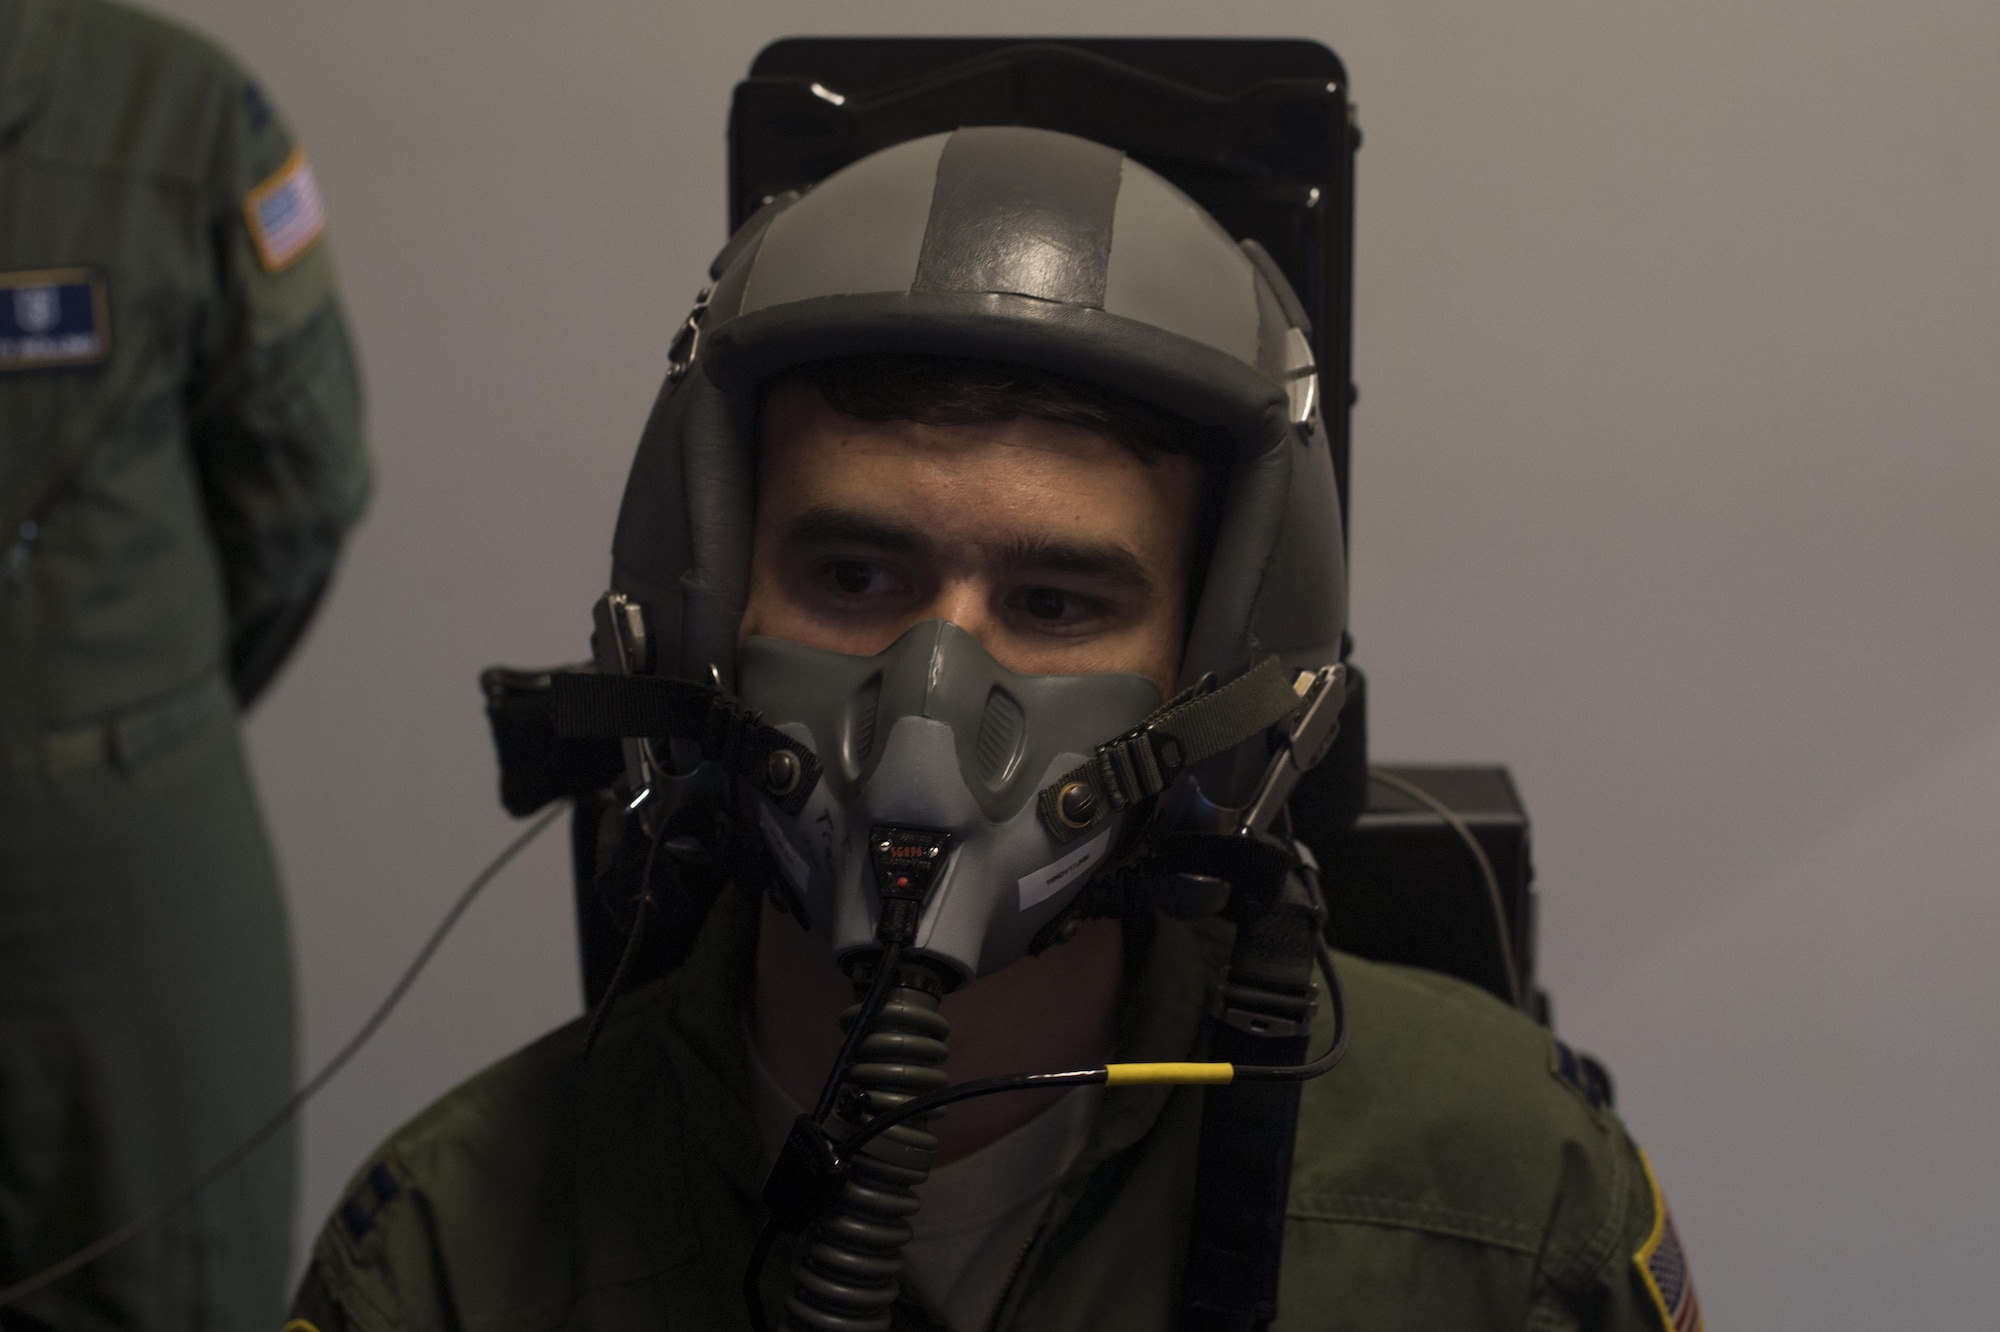 A U.S. Air Force 86th Operations Support Squadron pilot flies a simulated aircraft while hooked up to the 86th Aerospace Medicine Squadron Aerospace Physiology’s reduced oxygen breathing device on Ramstein Air Base, Germany, Sept. 13, 2017. Aerospace physiology Airmen use the ROBD to familiarize pilots and other crew members with the effects of hypoxia, the lack of oxygen at high altitudes, and how to mitigate the symptoms and safely complete their mission. (U.S. Air Force photo by Senior Airman Tryphena Mayhugh)